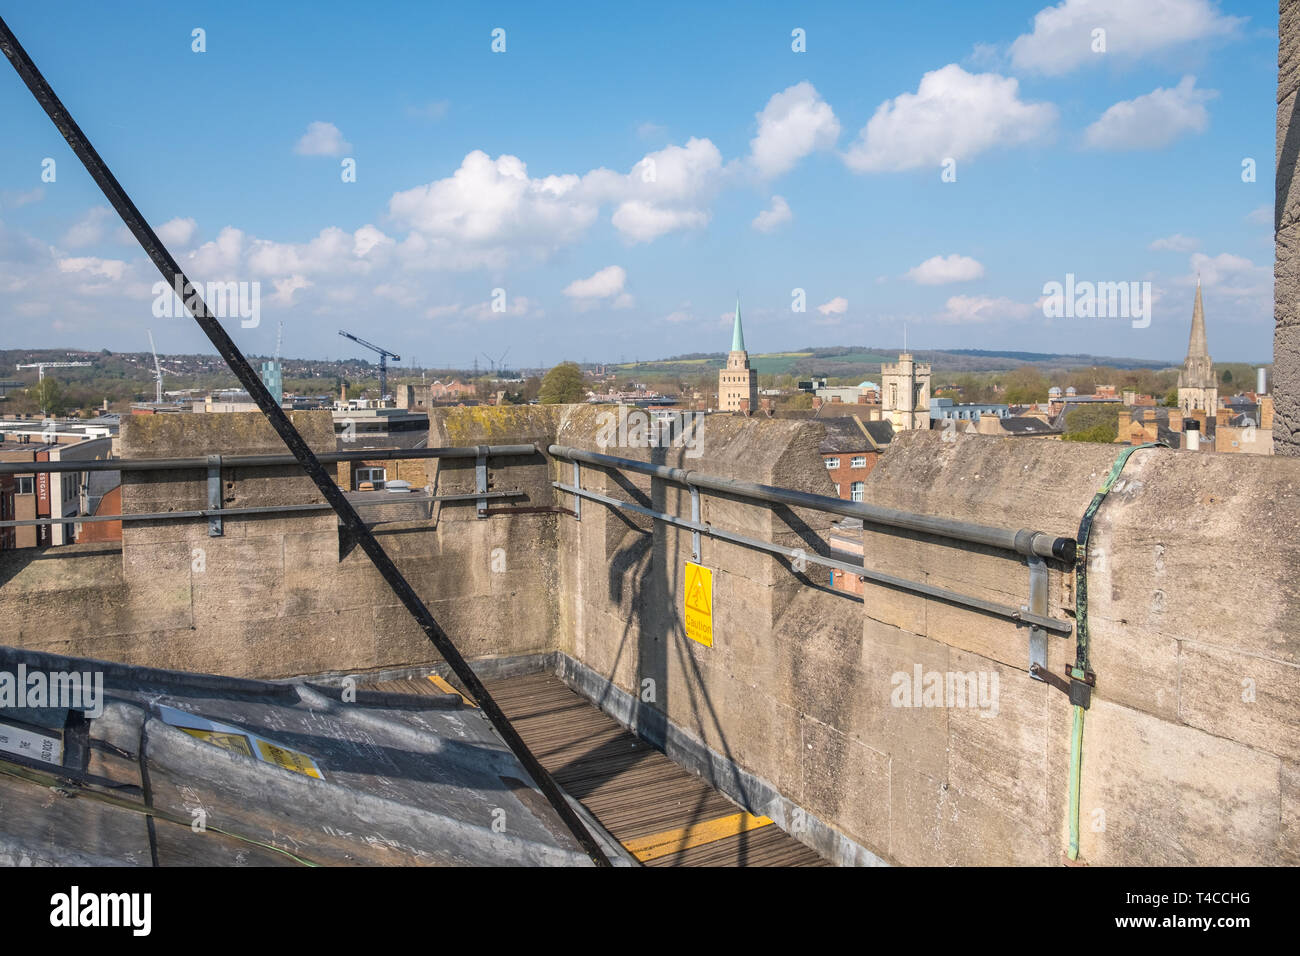 The viewing platform on the rooftop of the 12th Century Carfax Tower in Oxford, UK Stock Photo